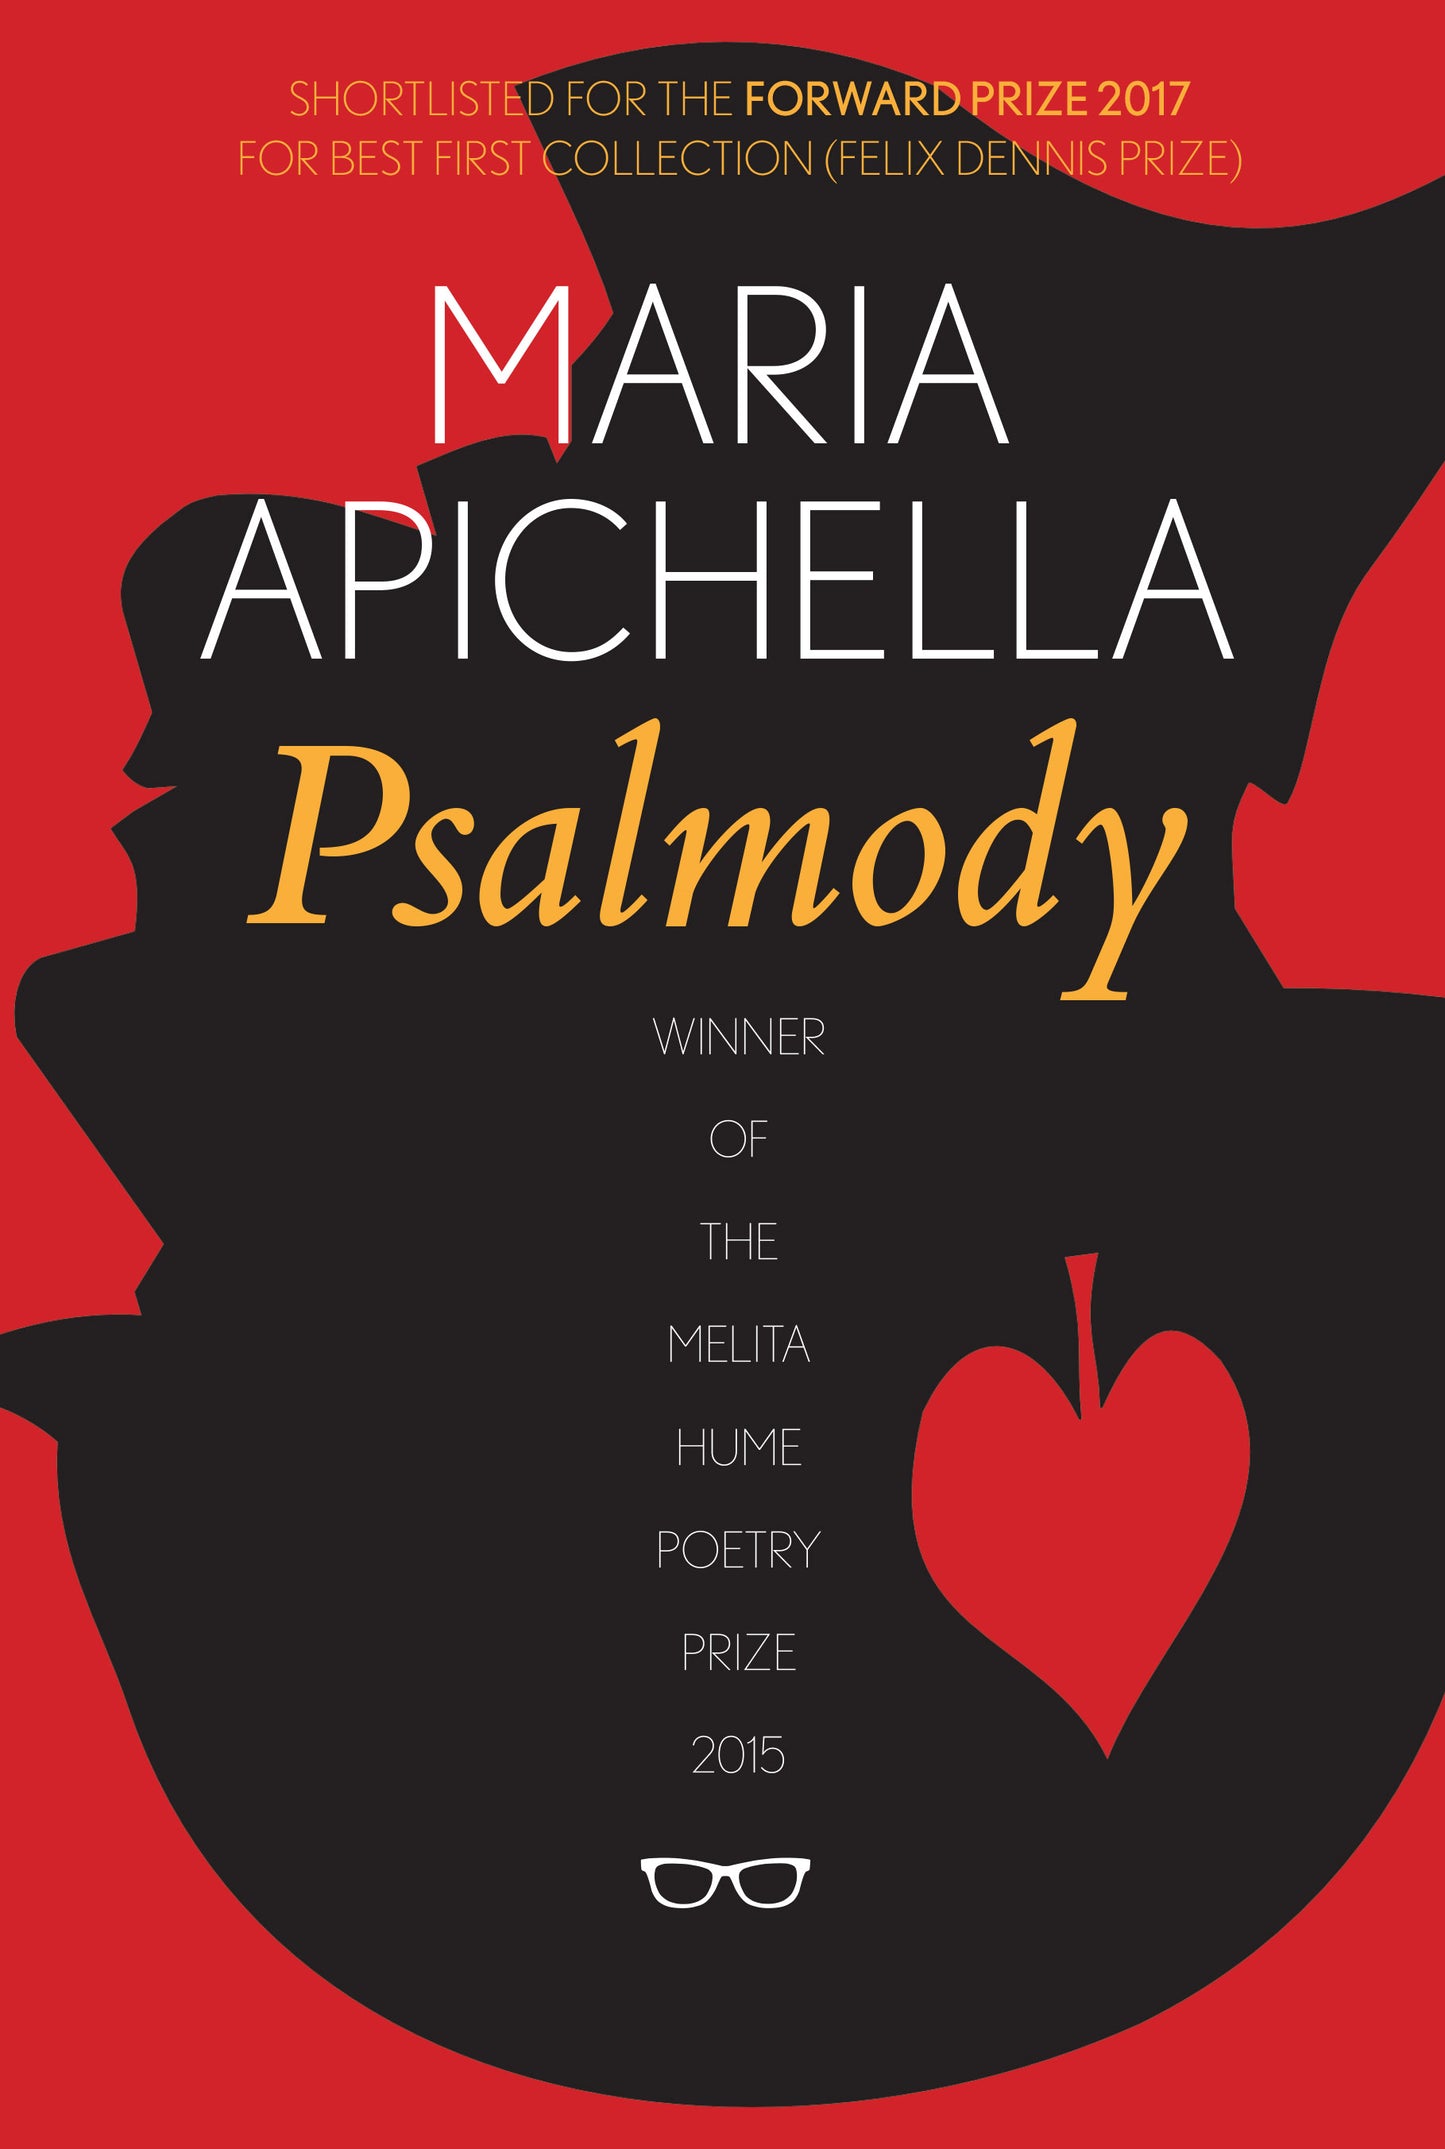 Psalmody - A 2017 BOOK OF THE YEAR!